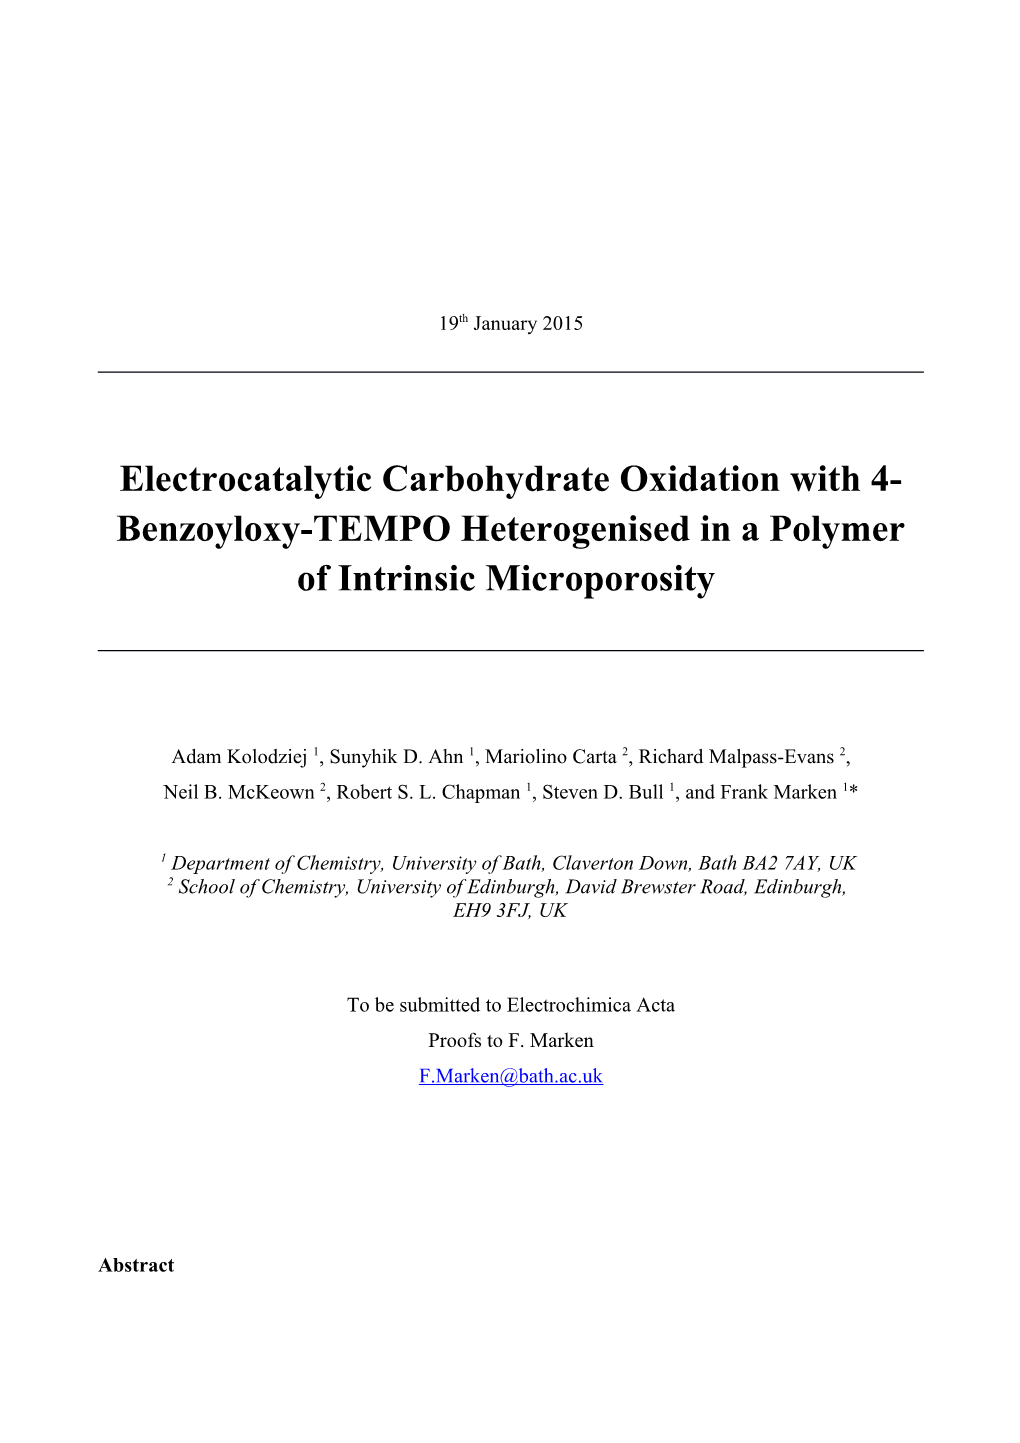 Electrocatalytic Carbohydrate Oxidation with 4-Benzoyloxy-TEMPO Heterogenised in a Polymer